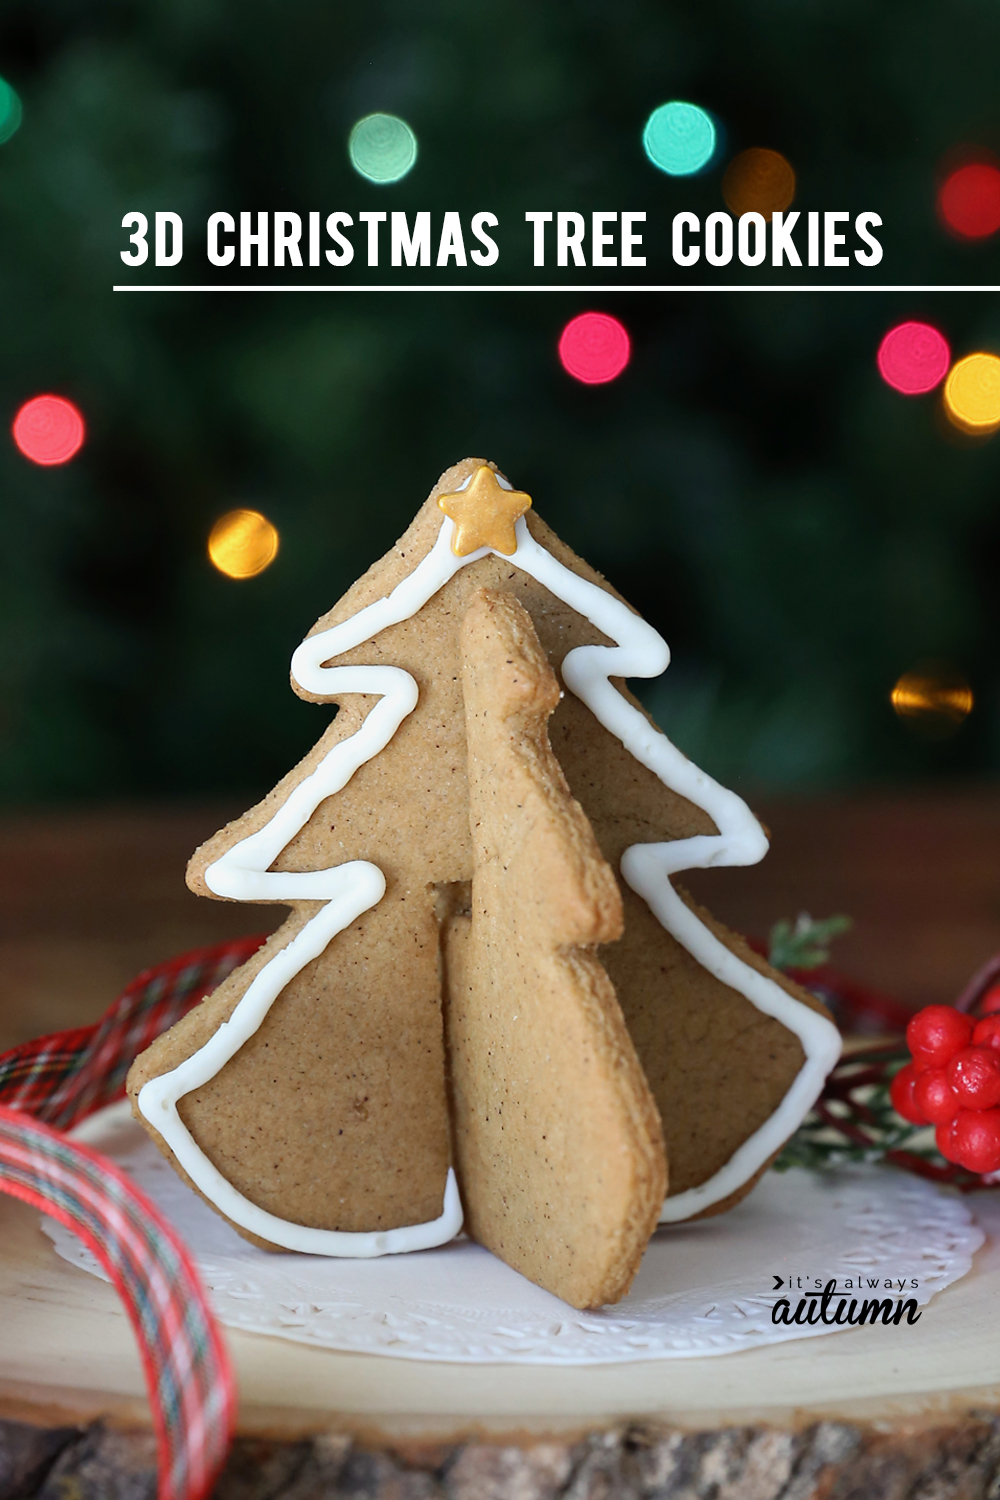 3D Christmas tree gingerbread cookie